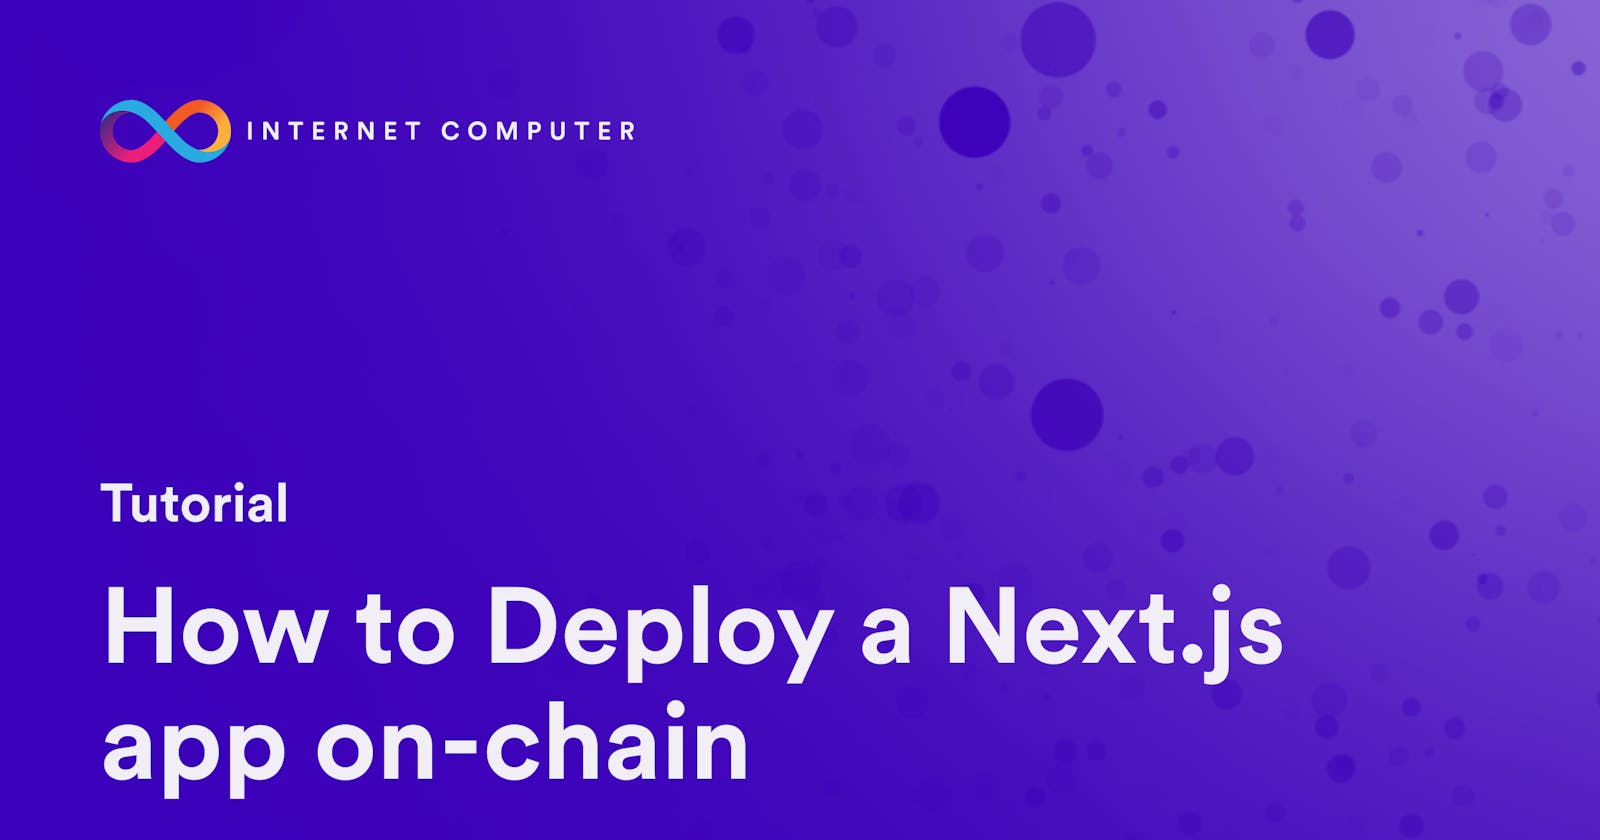 How to deploy a Next.js app on-chain